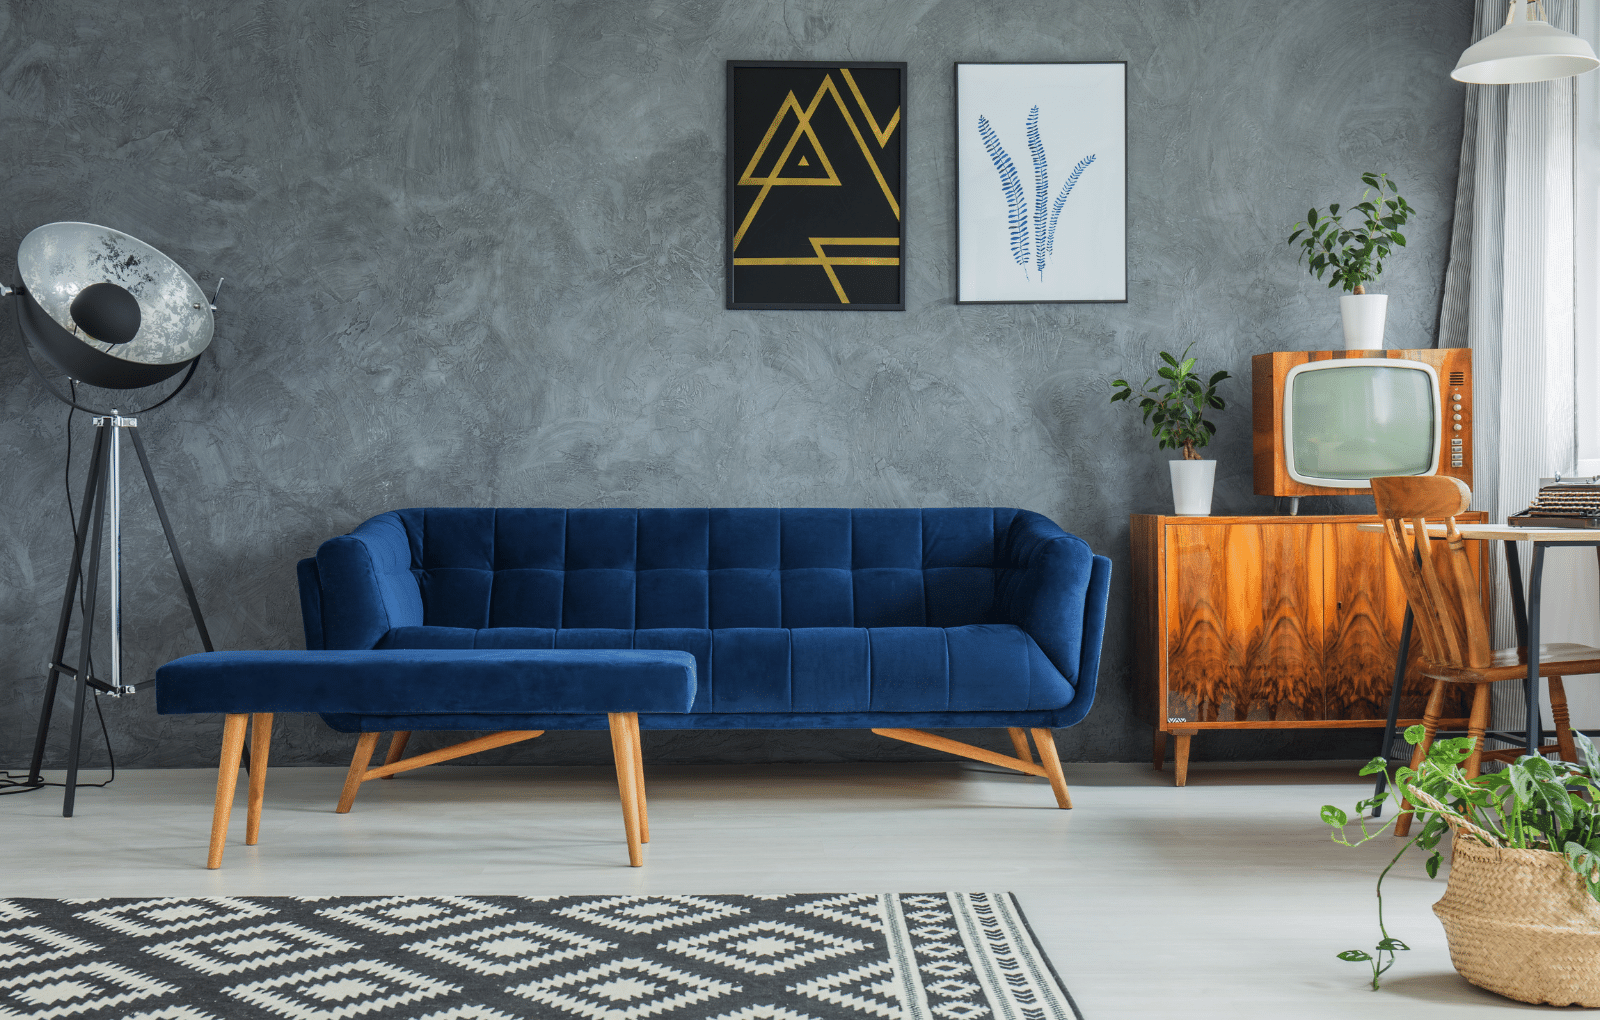 Living room with blue couch, art, and vintage decor